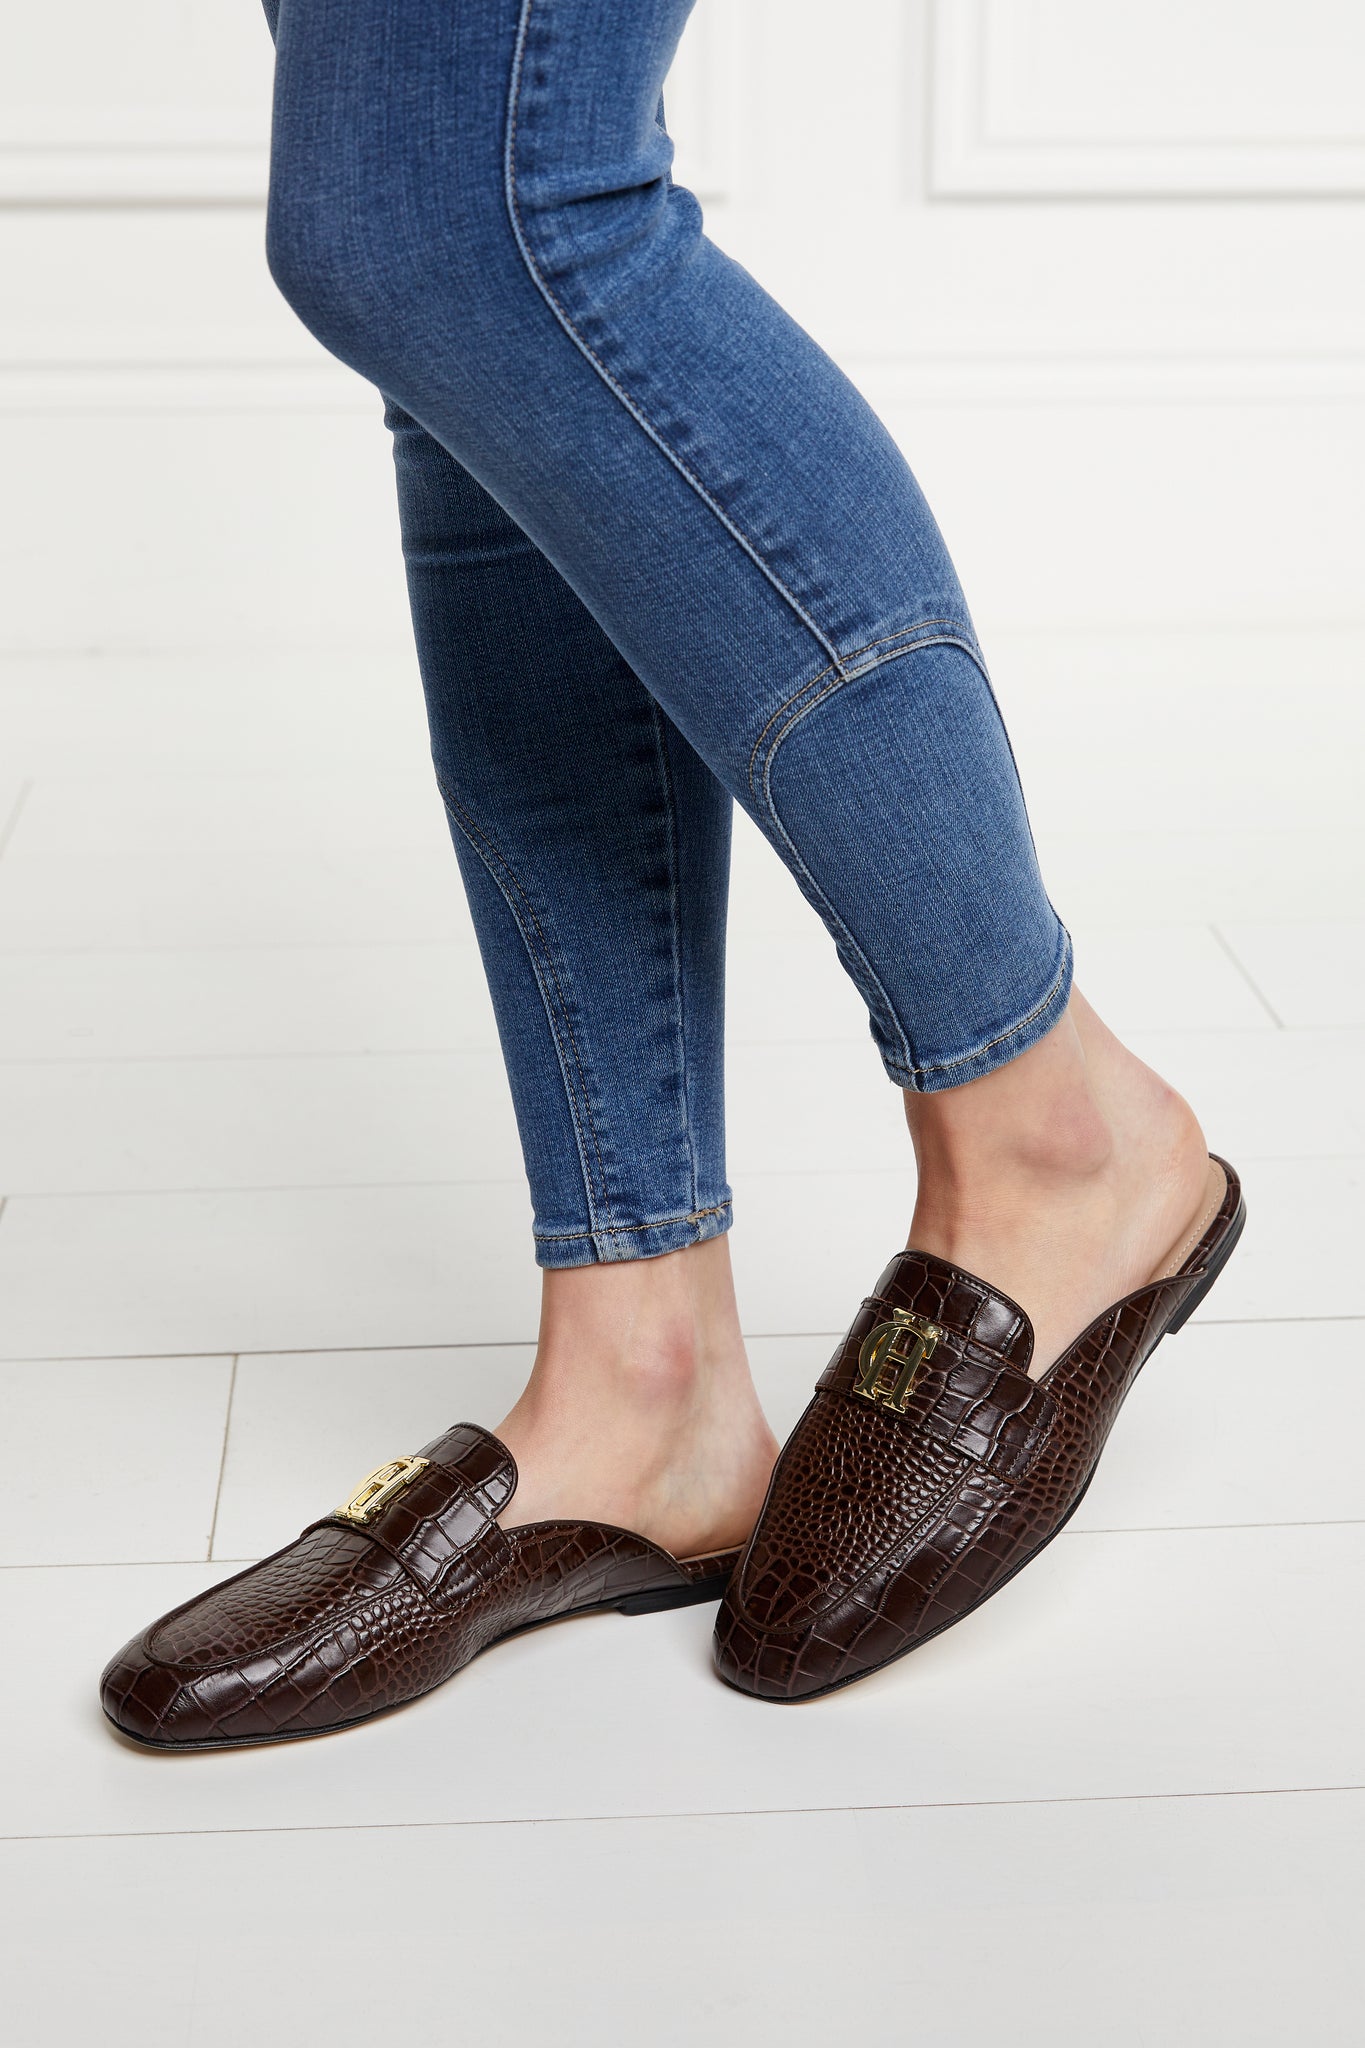 Brown croc embossed leather backless loafers with a slightly pointed toe and gold hardware to the top paired with denim skinny jeans